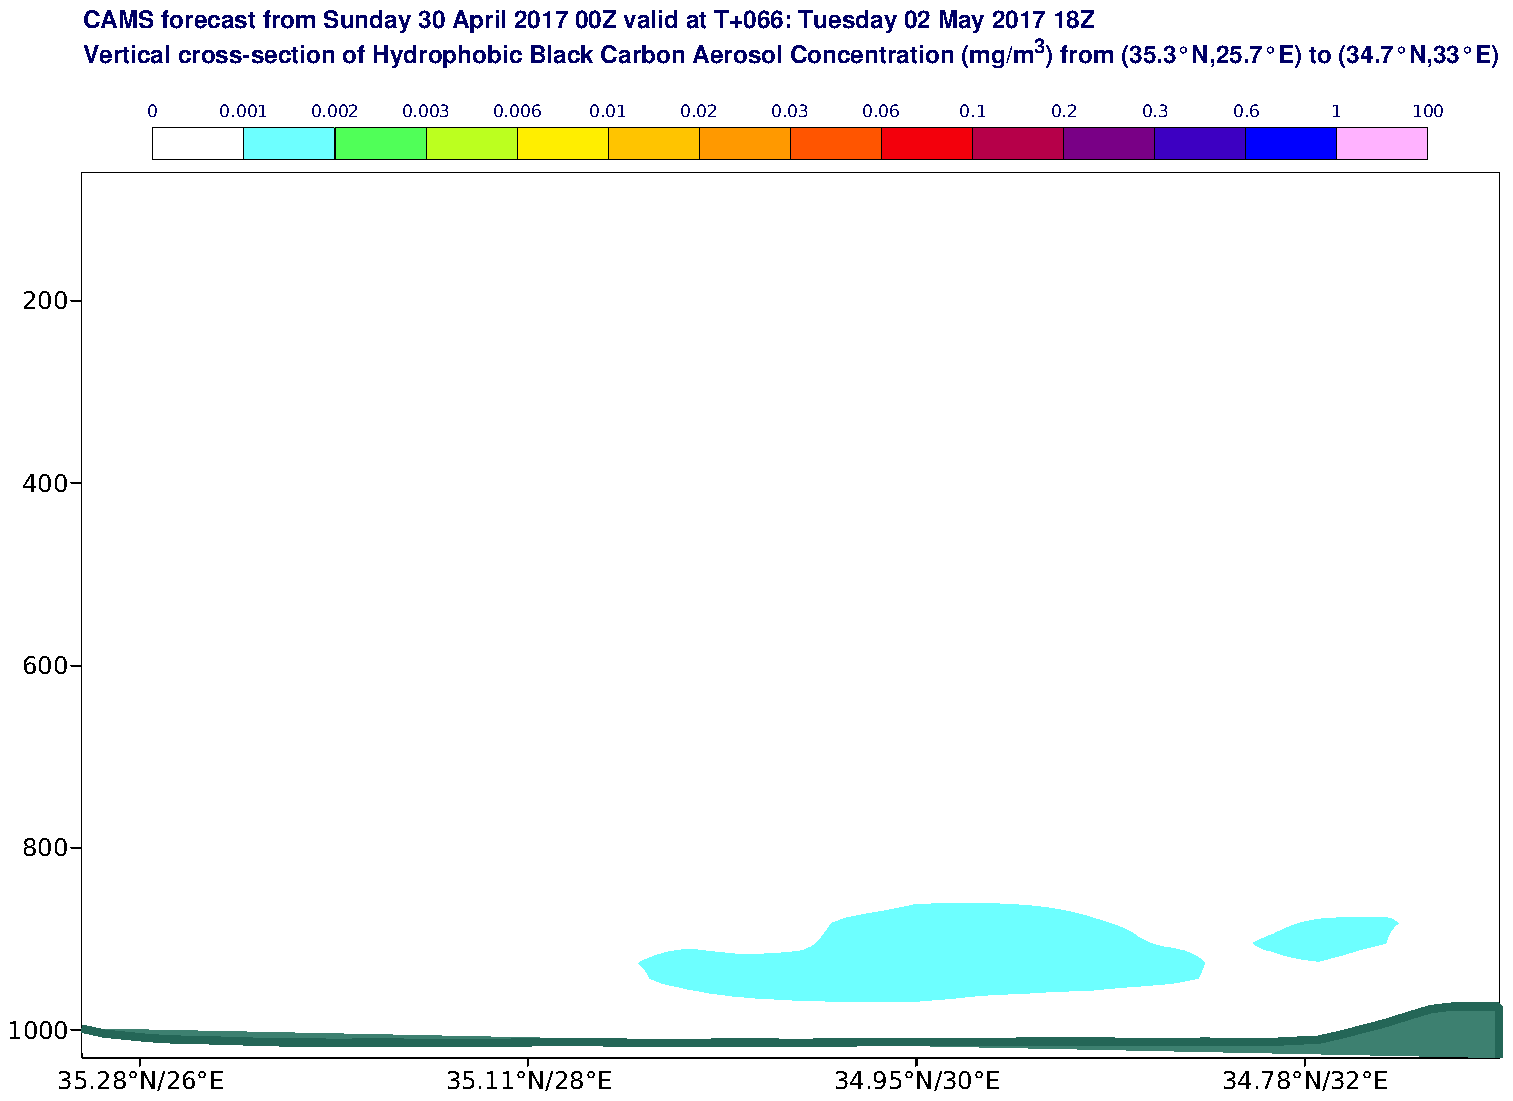 Vertical cross-section of Hydrophobic Black Carbon Aerosol Concentration (mg/m3) valid at T66 - 2017-05-02 18:00